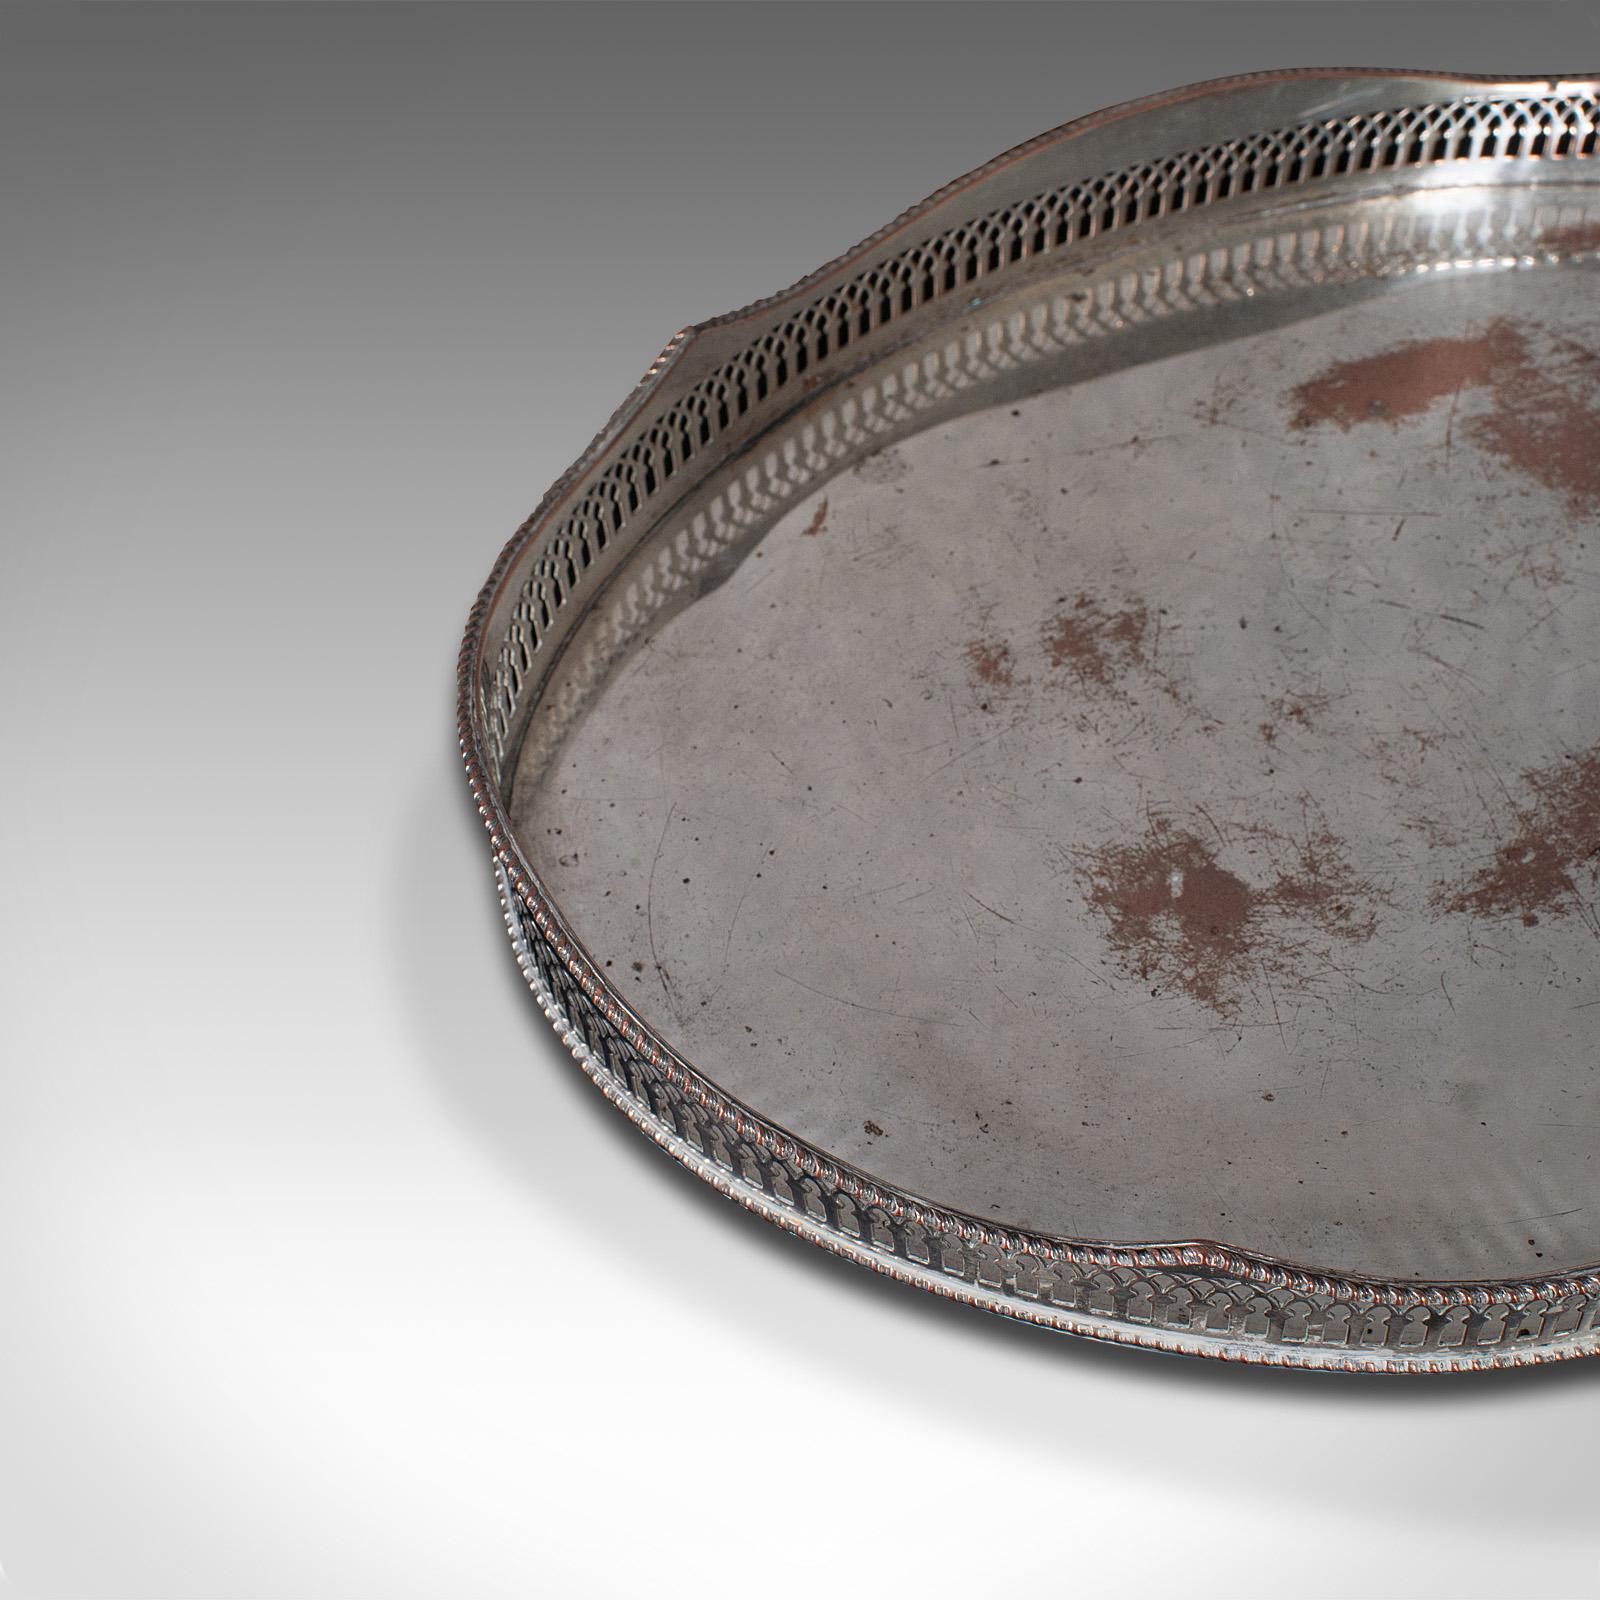 Vintage Decorative Serving Tray, English, Silver Plate Afternoon Tea, Oval, 1930 2